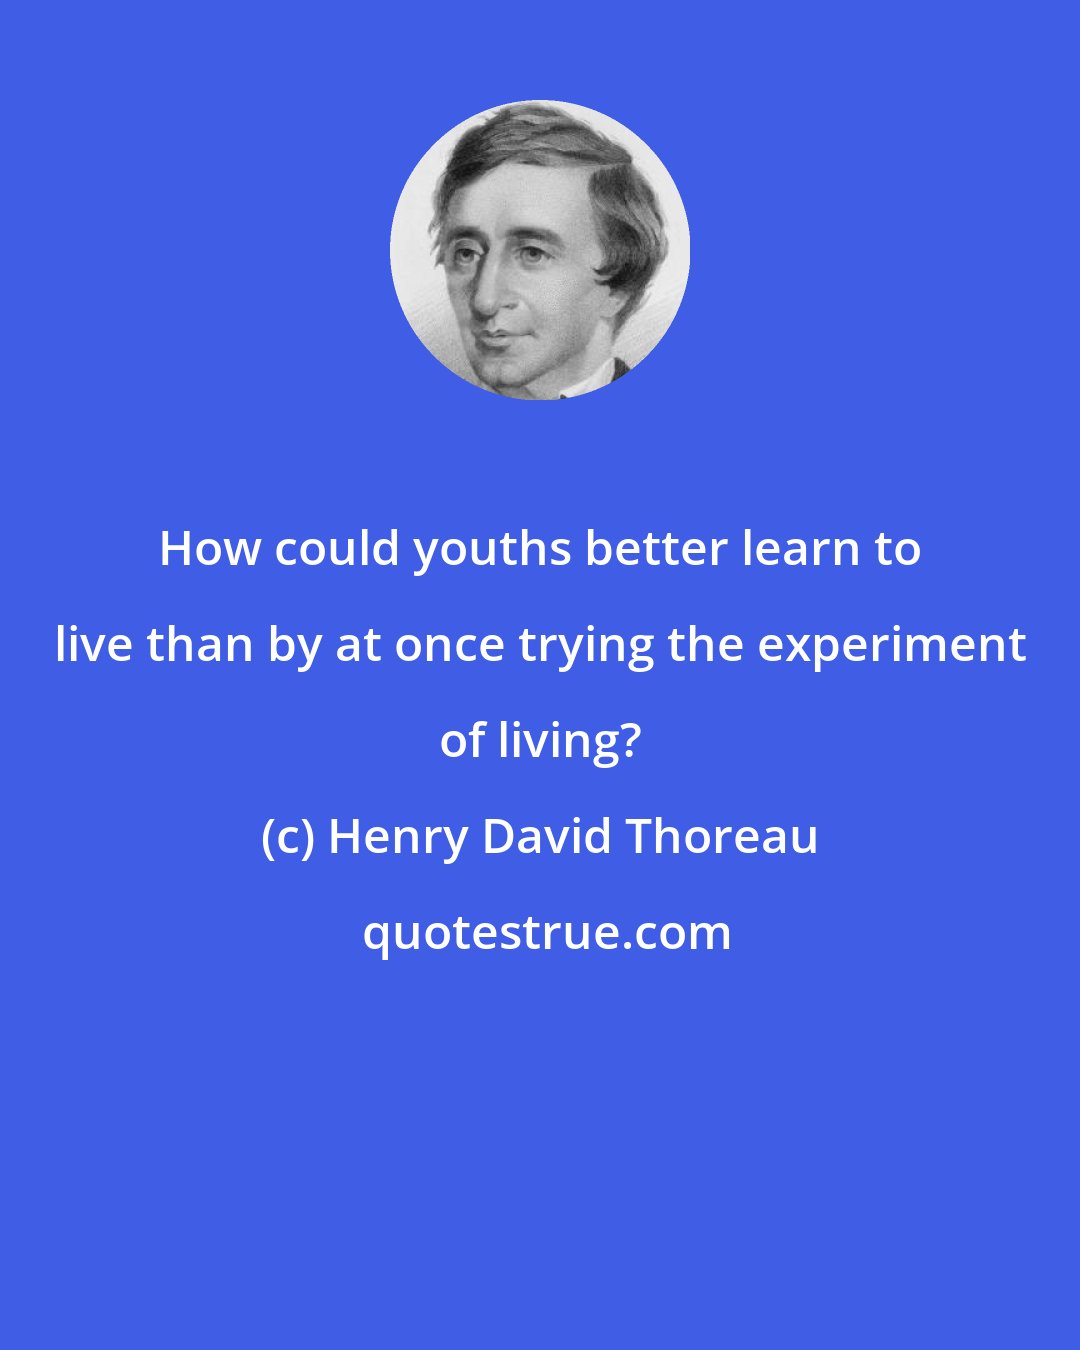 Henry David Thoreau: How could youths better learn to live than by at once trying the experiment of living?